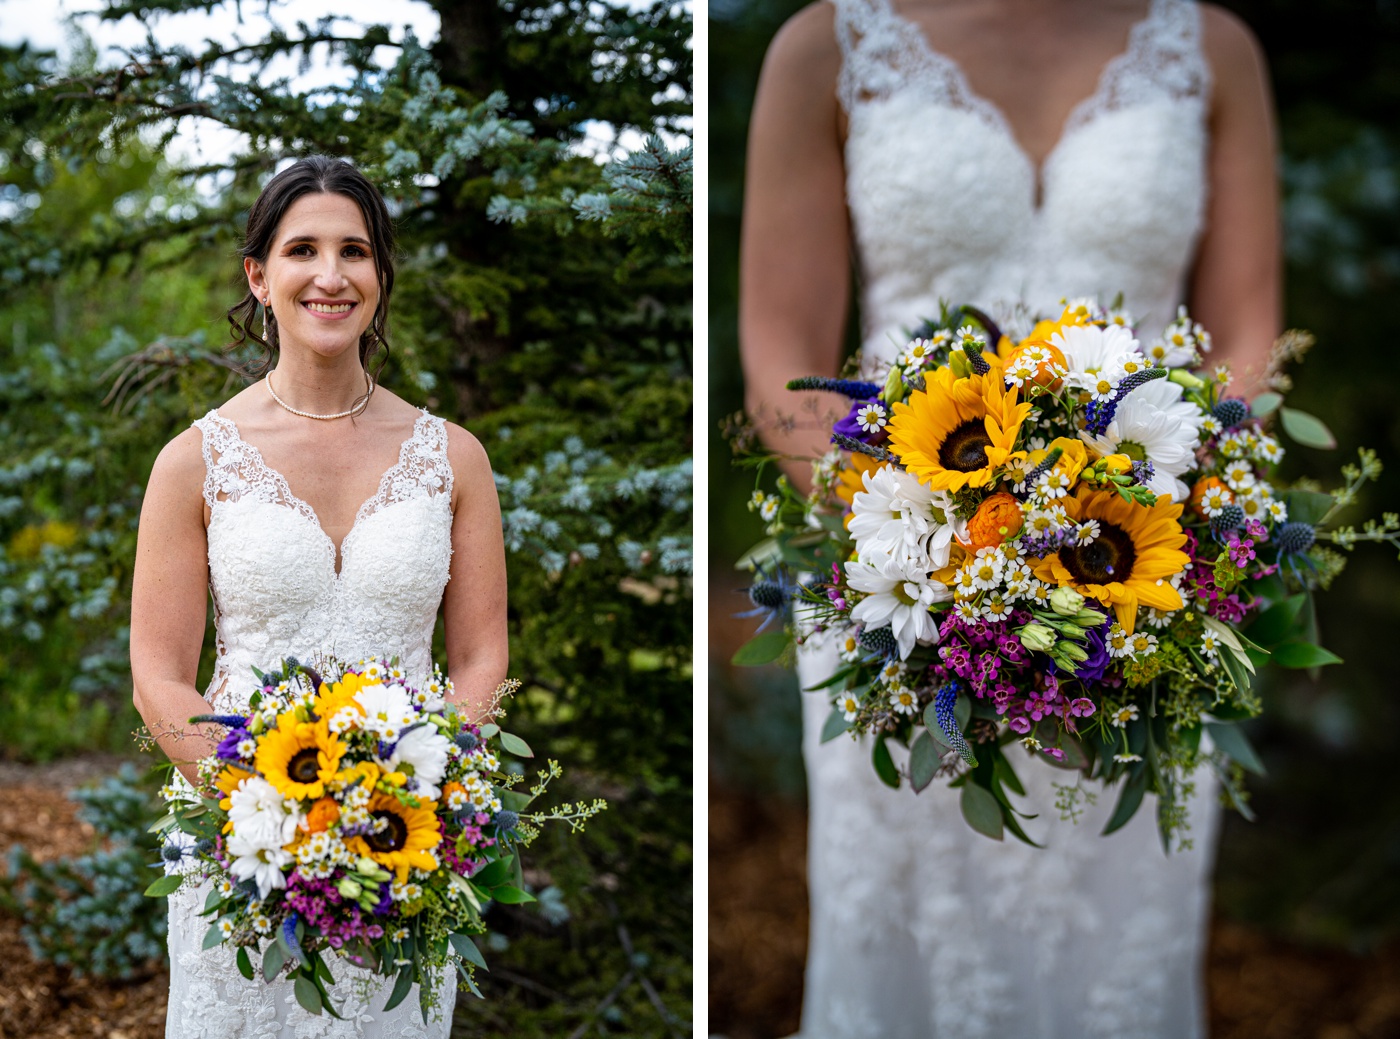 Fresh flower bridal bouquet with sunflowers